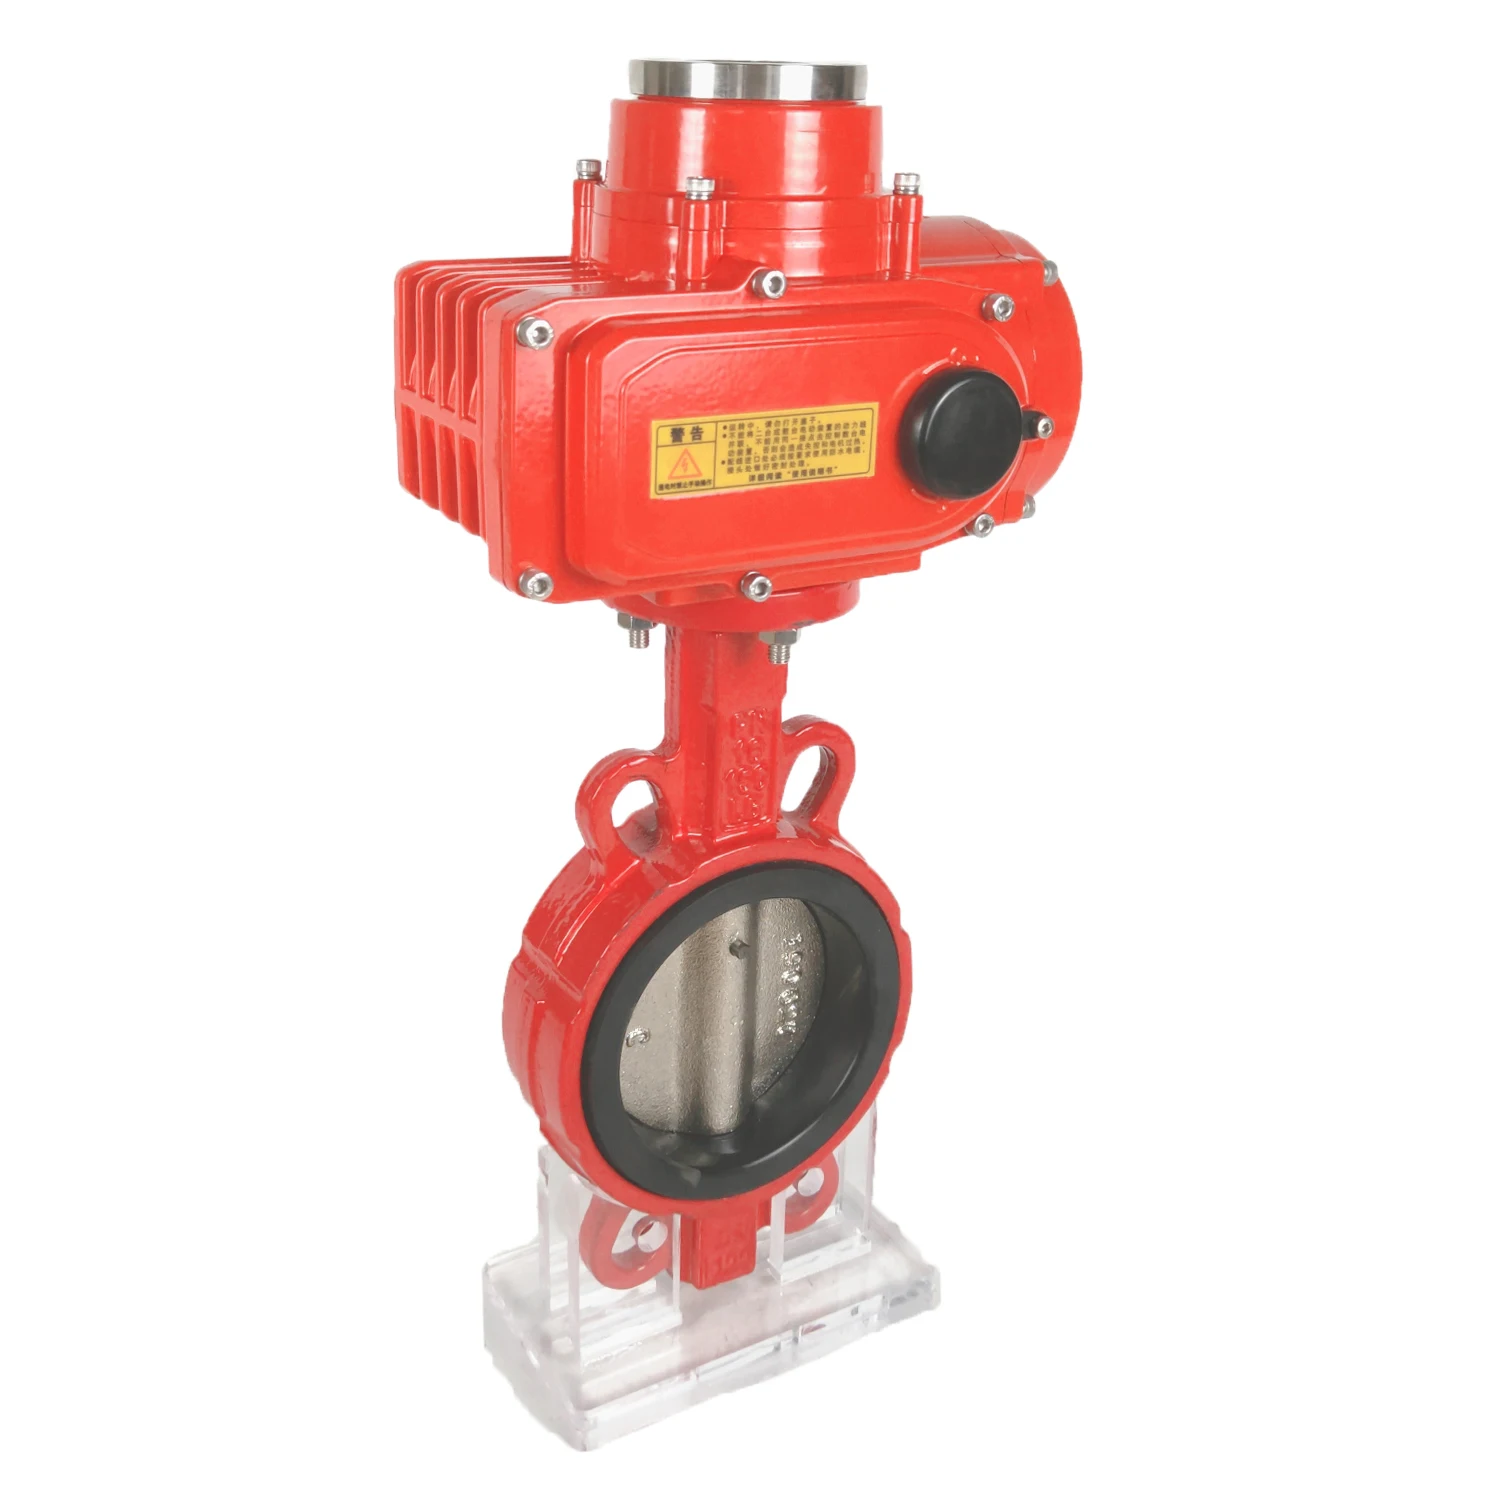 
Electric actuator explosion proof stainless steel butterfly valve dn200 price list 